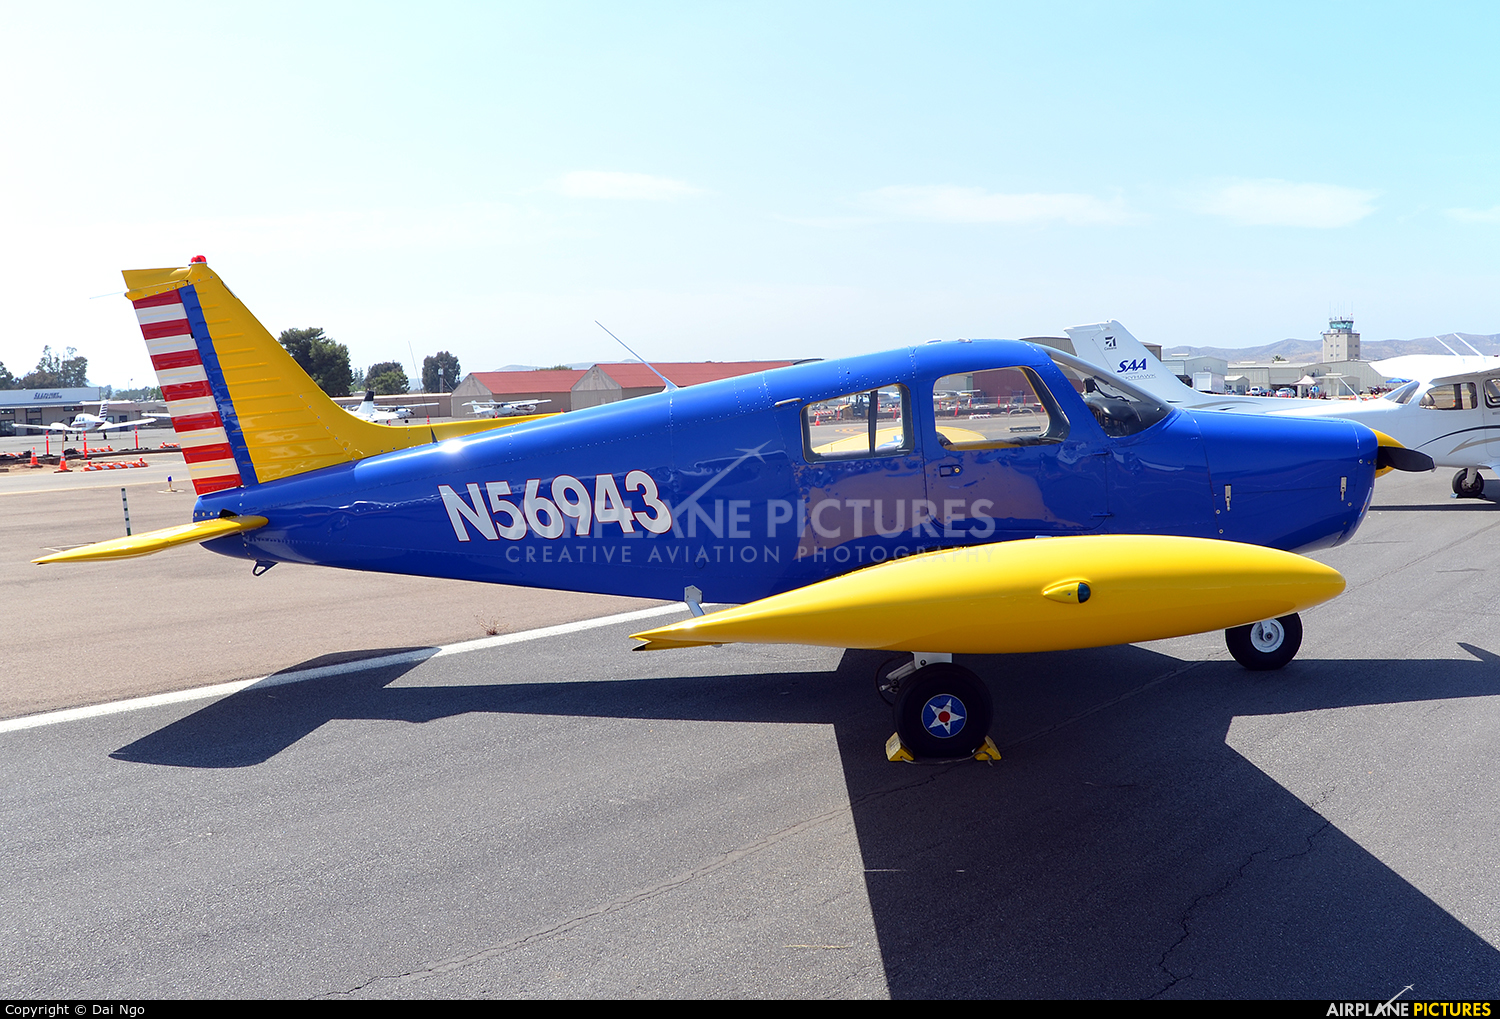 Private N56943 aircraft at El Cajon - Gillespie Field